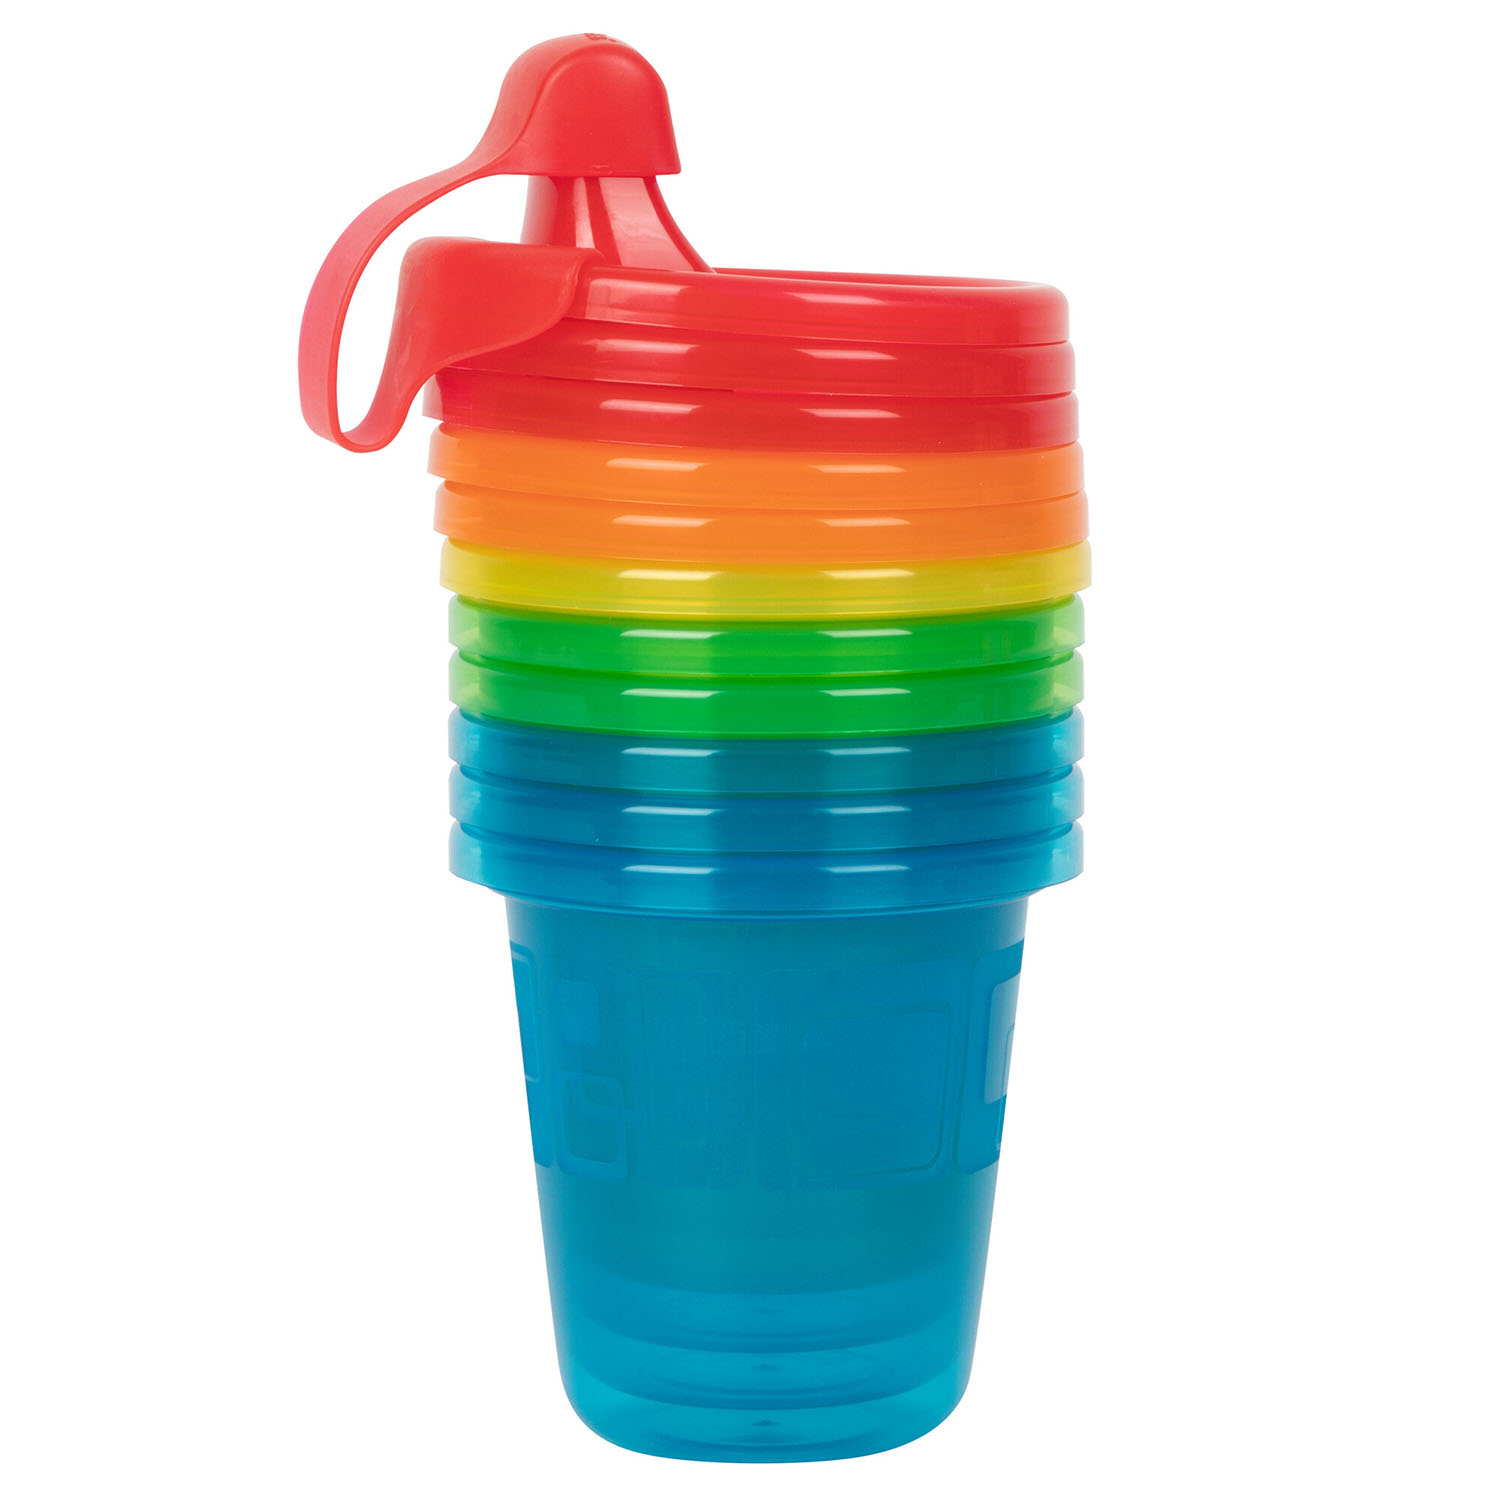 Adult Sippy Cups Spill Proof  Drinking Cup 300ml Spill Proof Cups